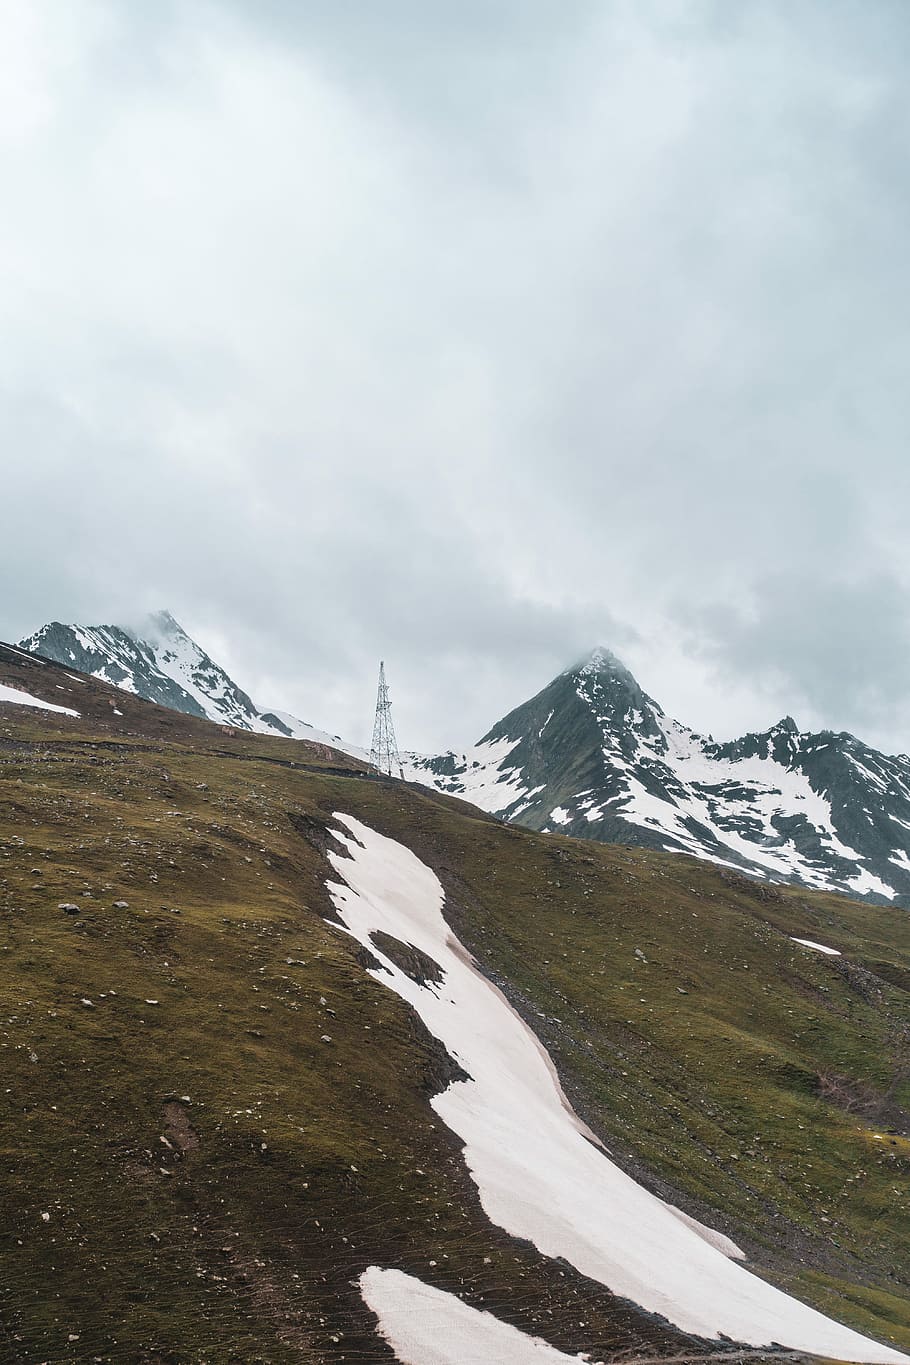 gray concrete tower on brown mountain under cloudy sky, landscape photography of snowy mountain